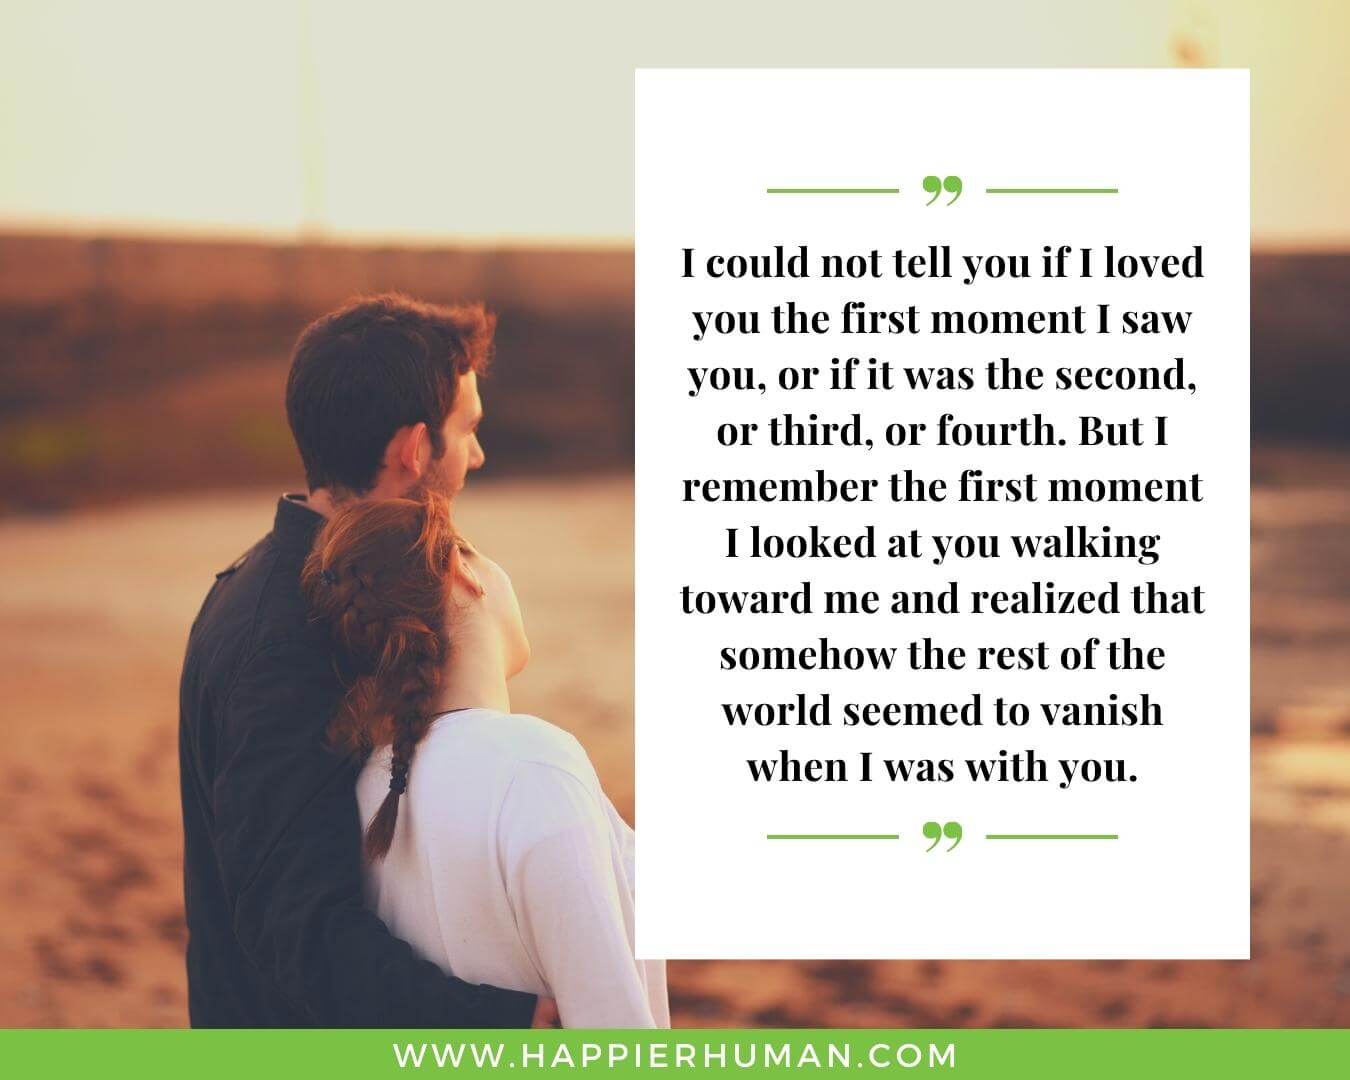 Strong relationship quotes - “I could not tell you if I loved you the first moment I saw you, or if it was the second, or third, or fourth. But I remember the first moment I looked at you walking toward me and realized that somehow the rest of the world seemed to vanish when I was with you.”